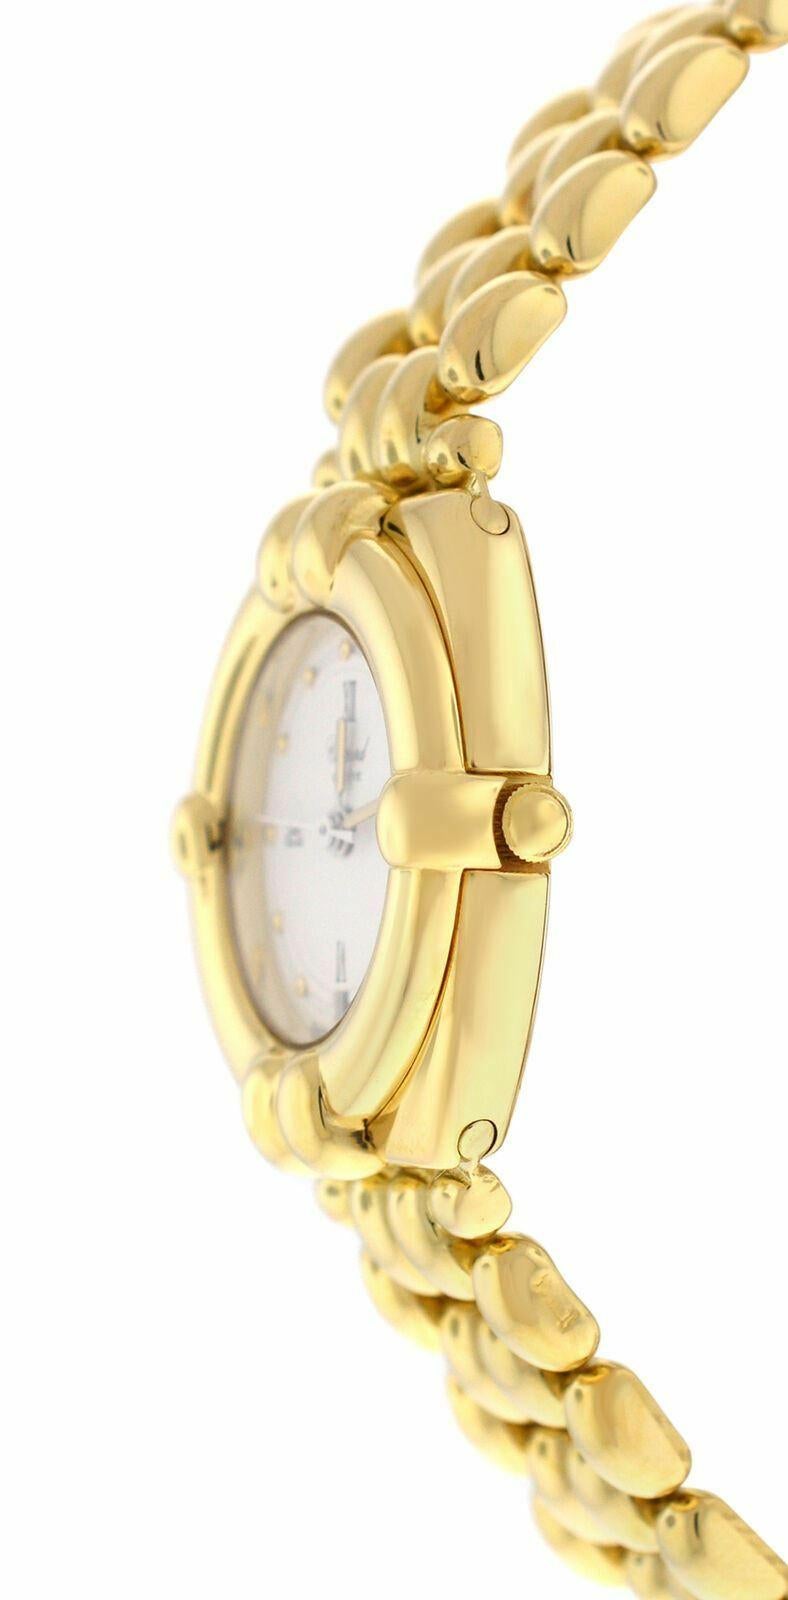 
Brand	Chopard
Model	Gstaad 32/5120
Gender	Ladies
Condition	Pre-owned
Movement	Swiss Quartz
Case Material	18K Yellow Gold
Bracelet / Strap Material	
18K Yellow Gold

Clasp / Buckle Material	
18K White Gold 

Clasp Type	Butterfly Deployment
Bracelet